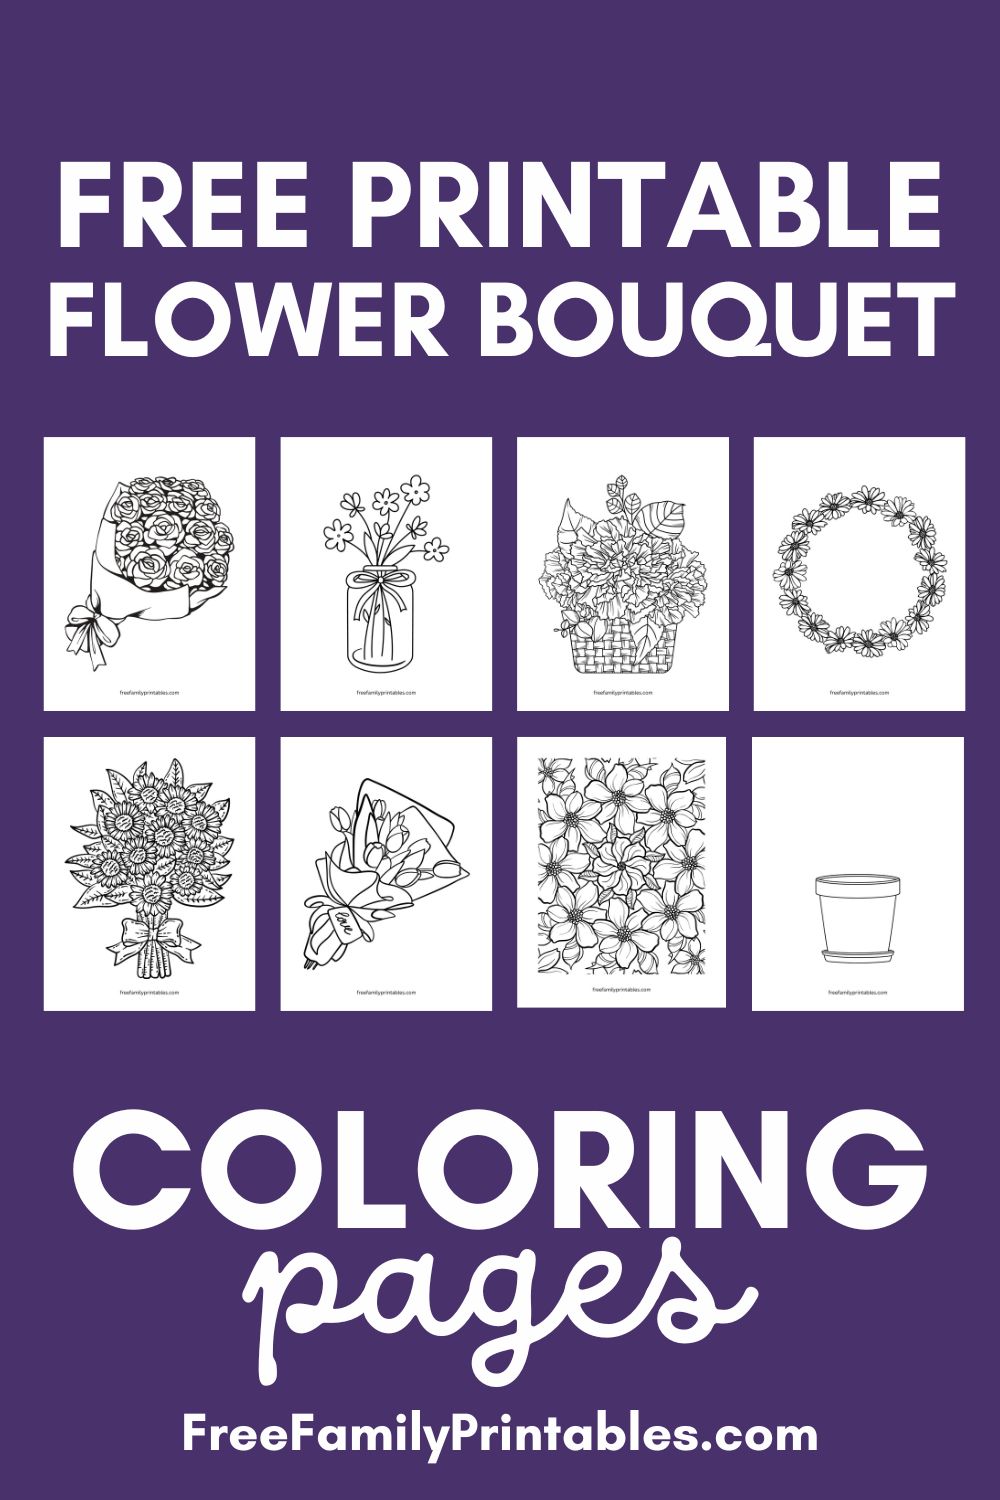 Flower bouquet coloring pages free printables